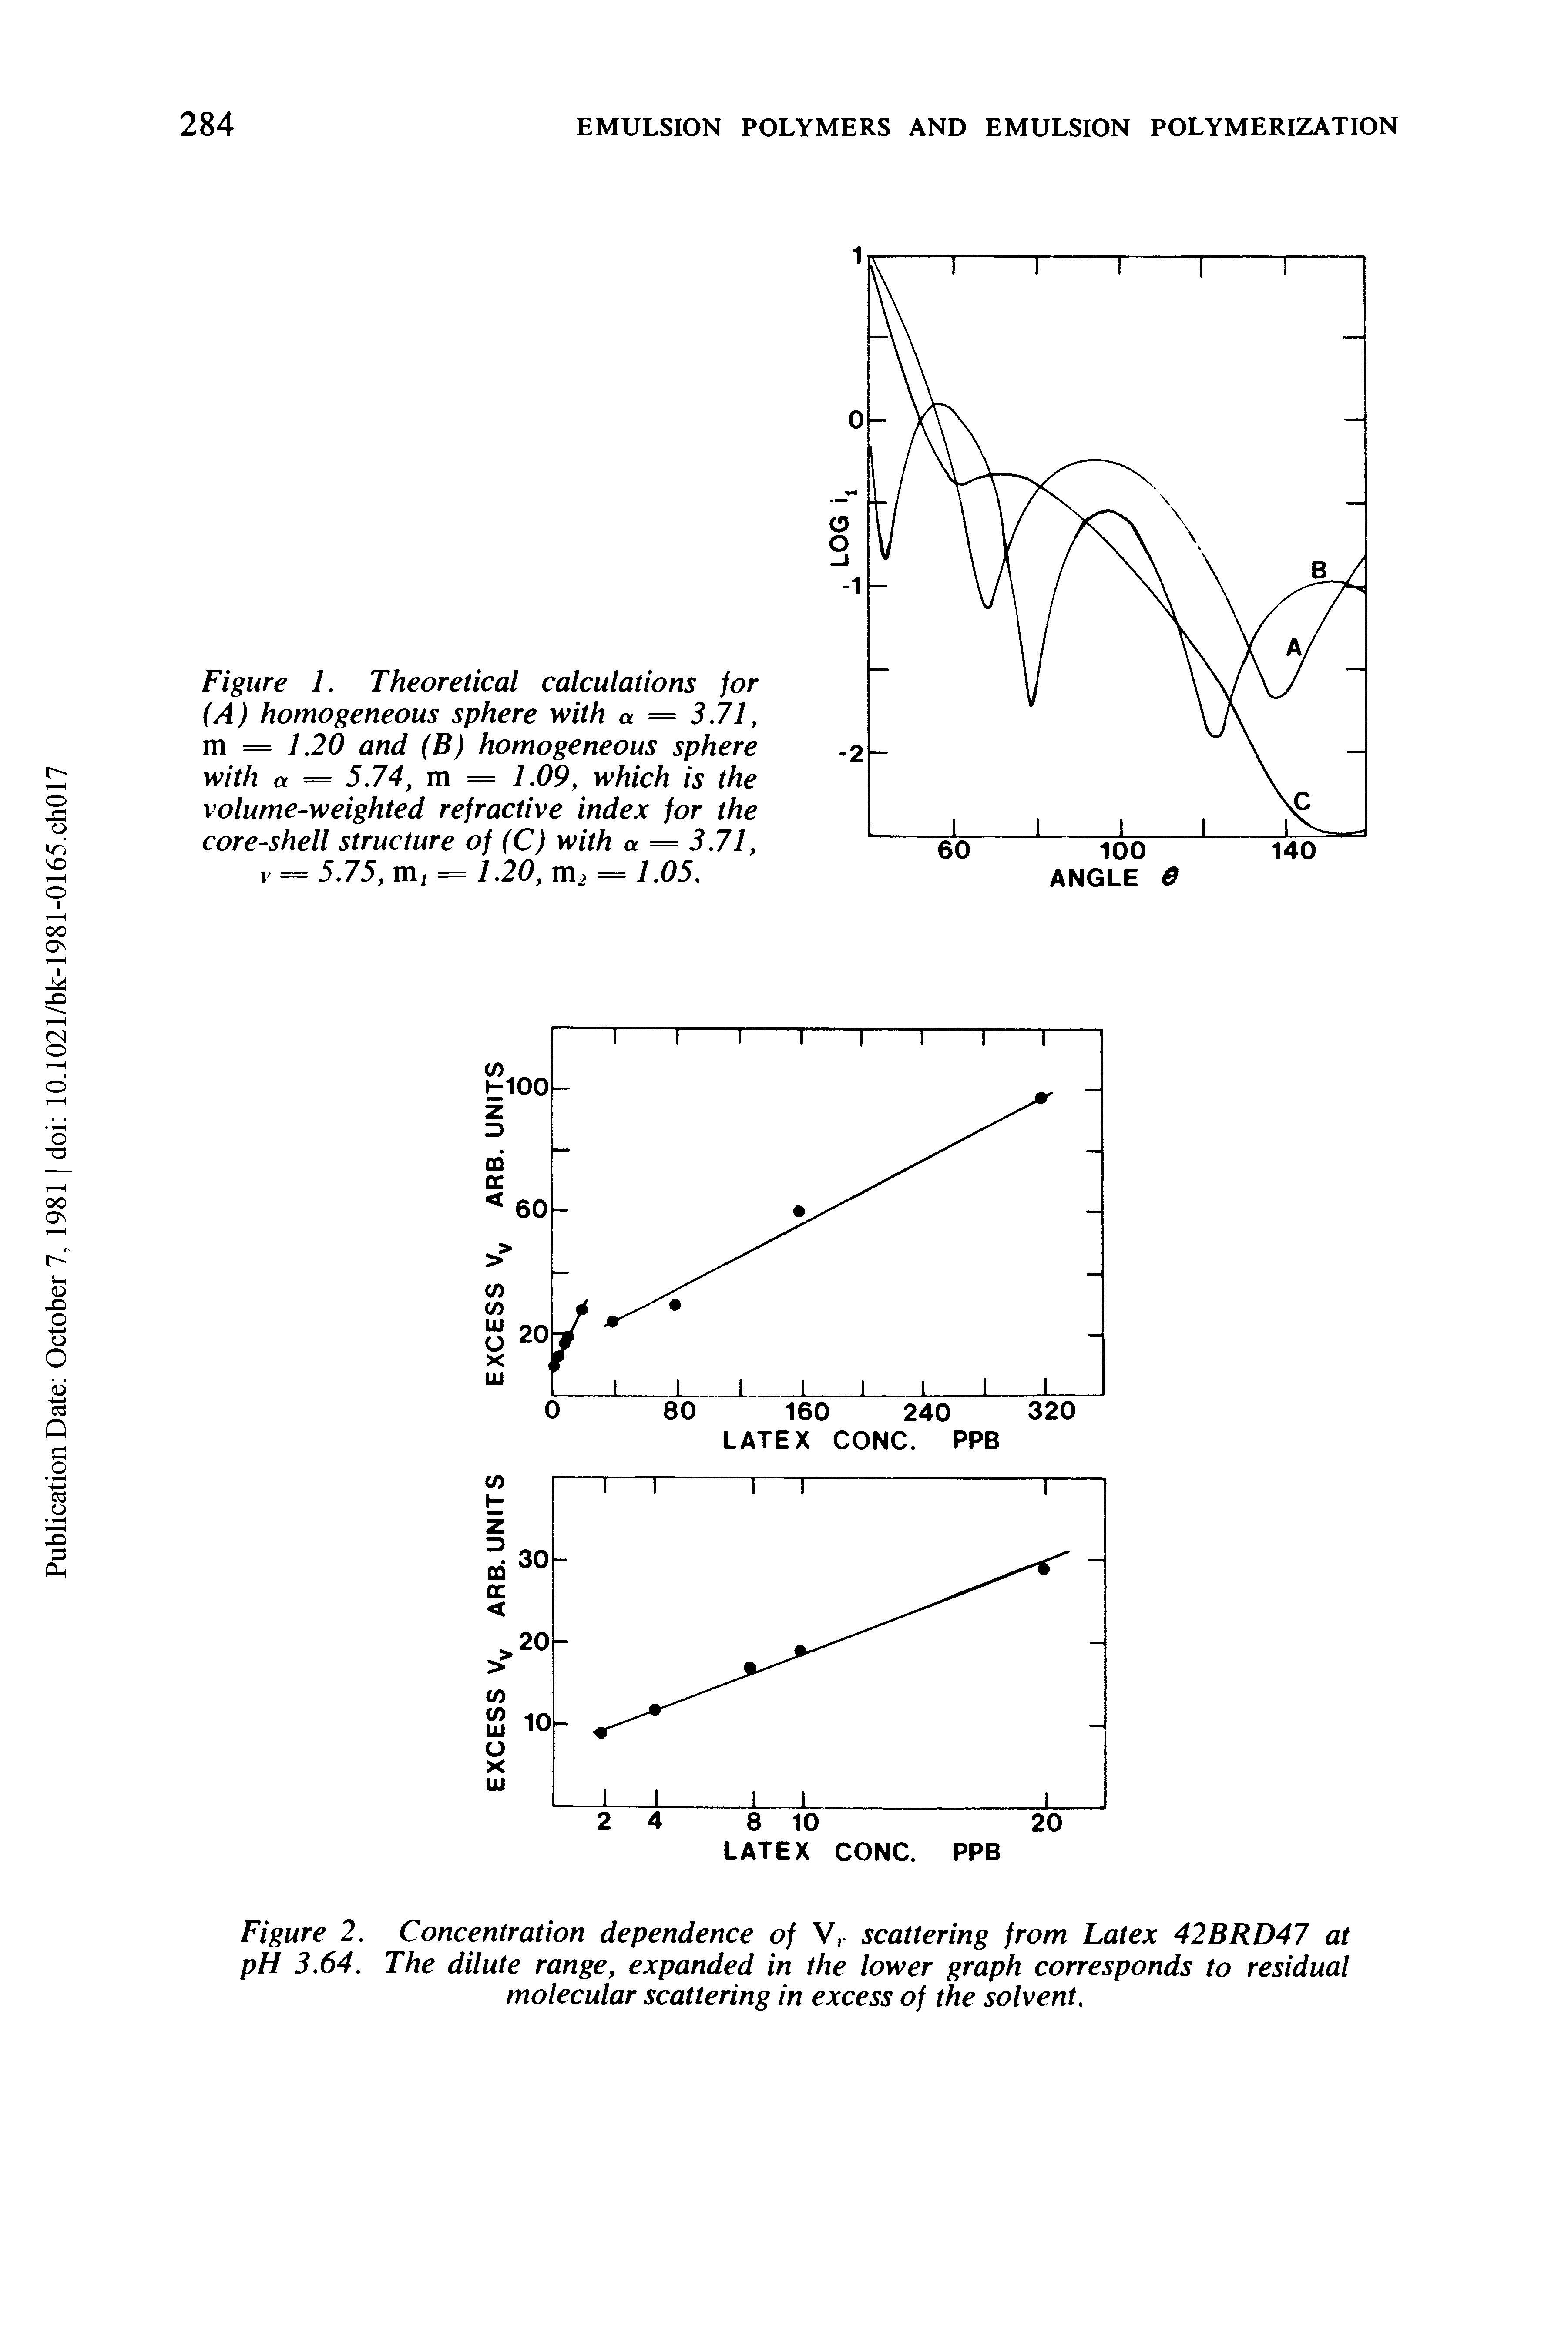 Figure 2. Concentration dependence of V, scattering from Latex 42BRD47 at pH 3.64. The dilute range, expanded in the lower graph corresponds to residual molecular scattering in excess of the solvent.